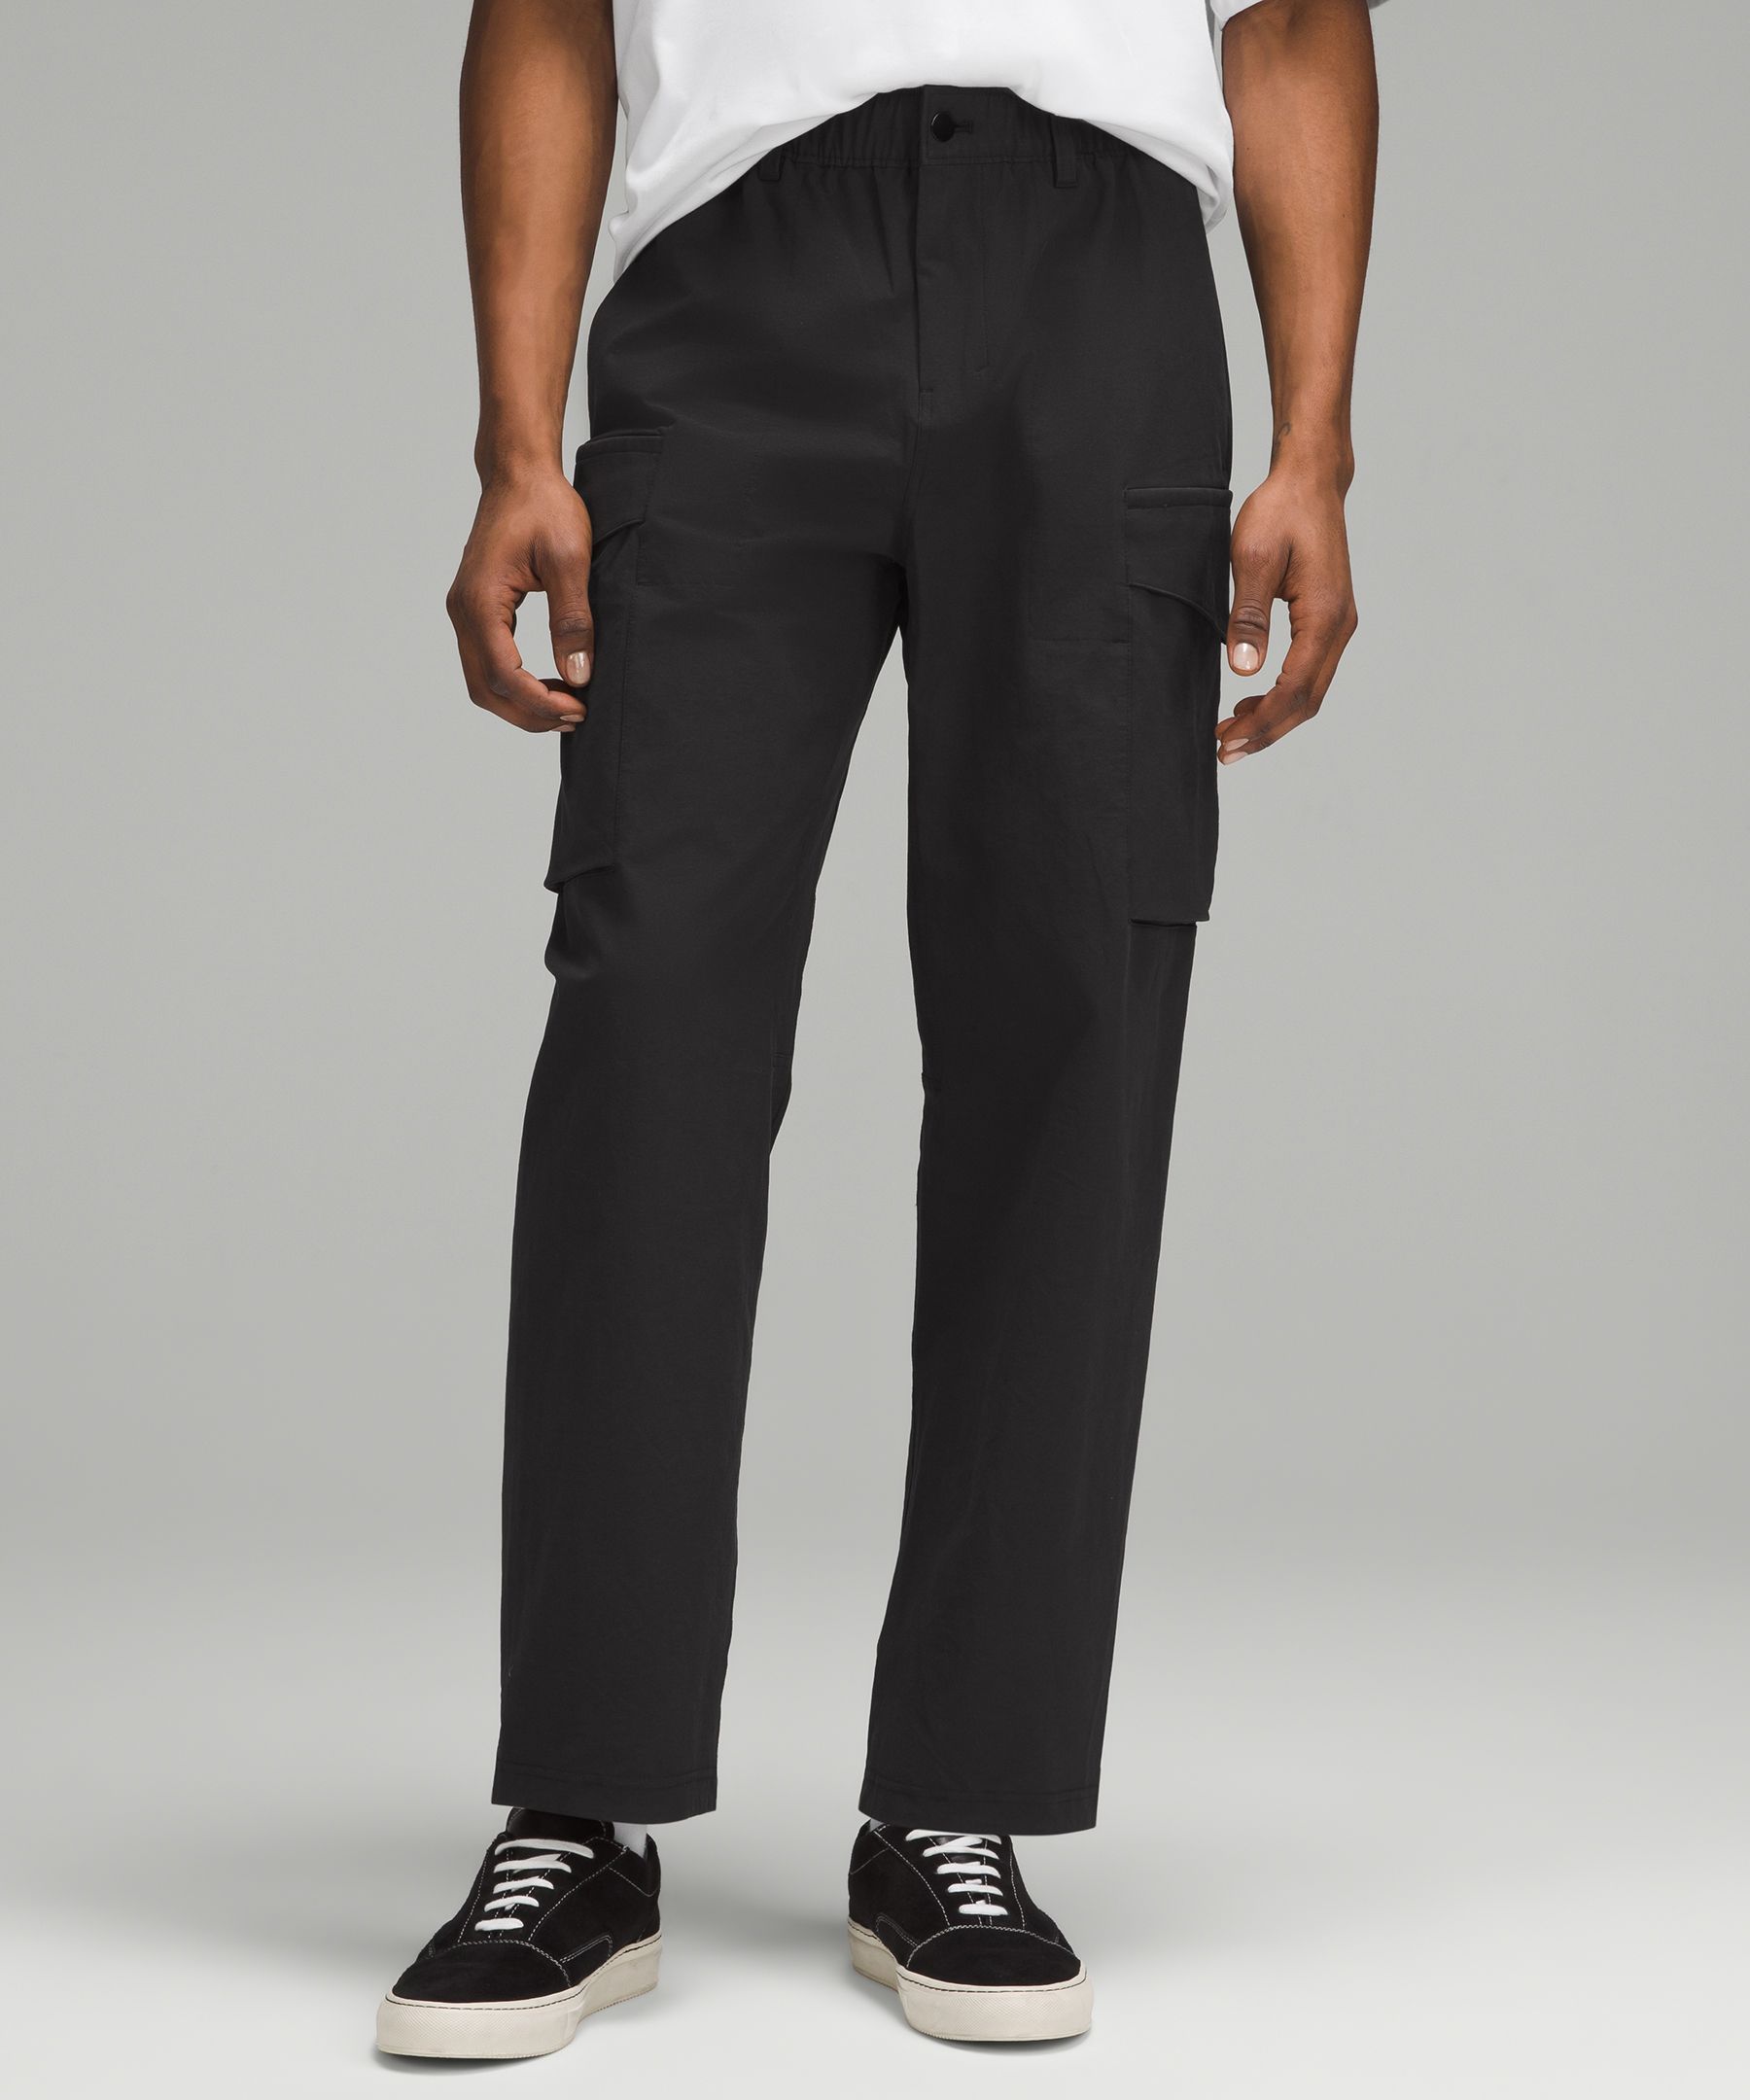 Lululemon athletica Stretch Cotton VersaTwill Relaxed-Fit Cargo Pant, Men's Trousers